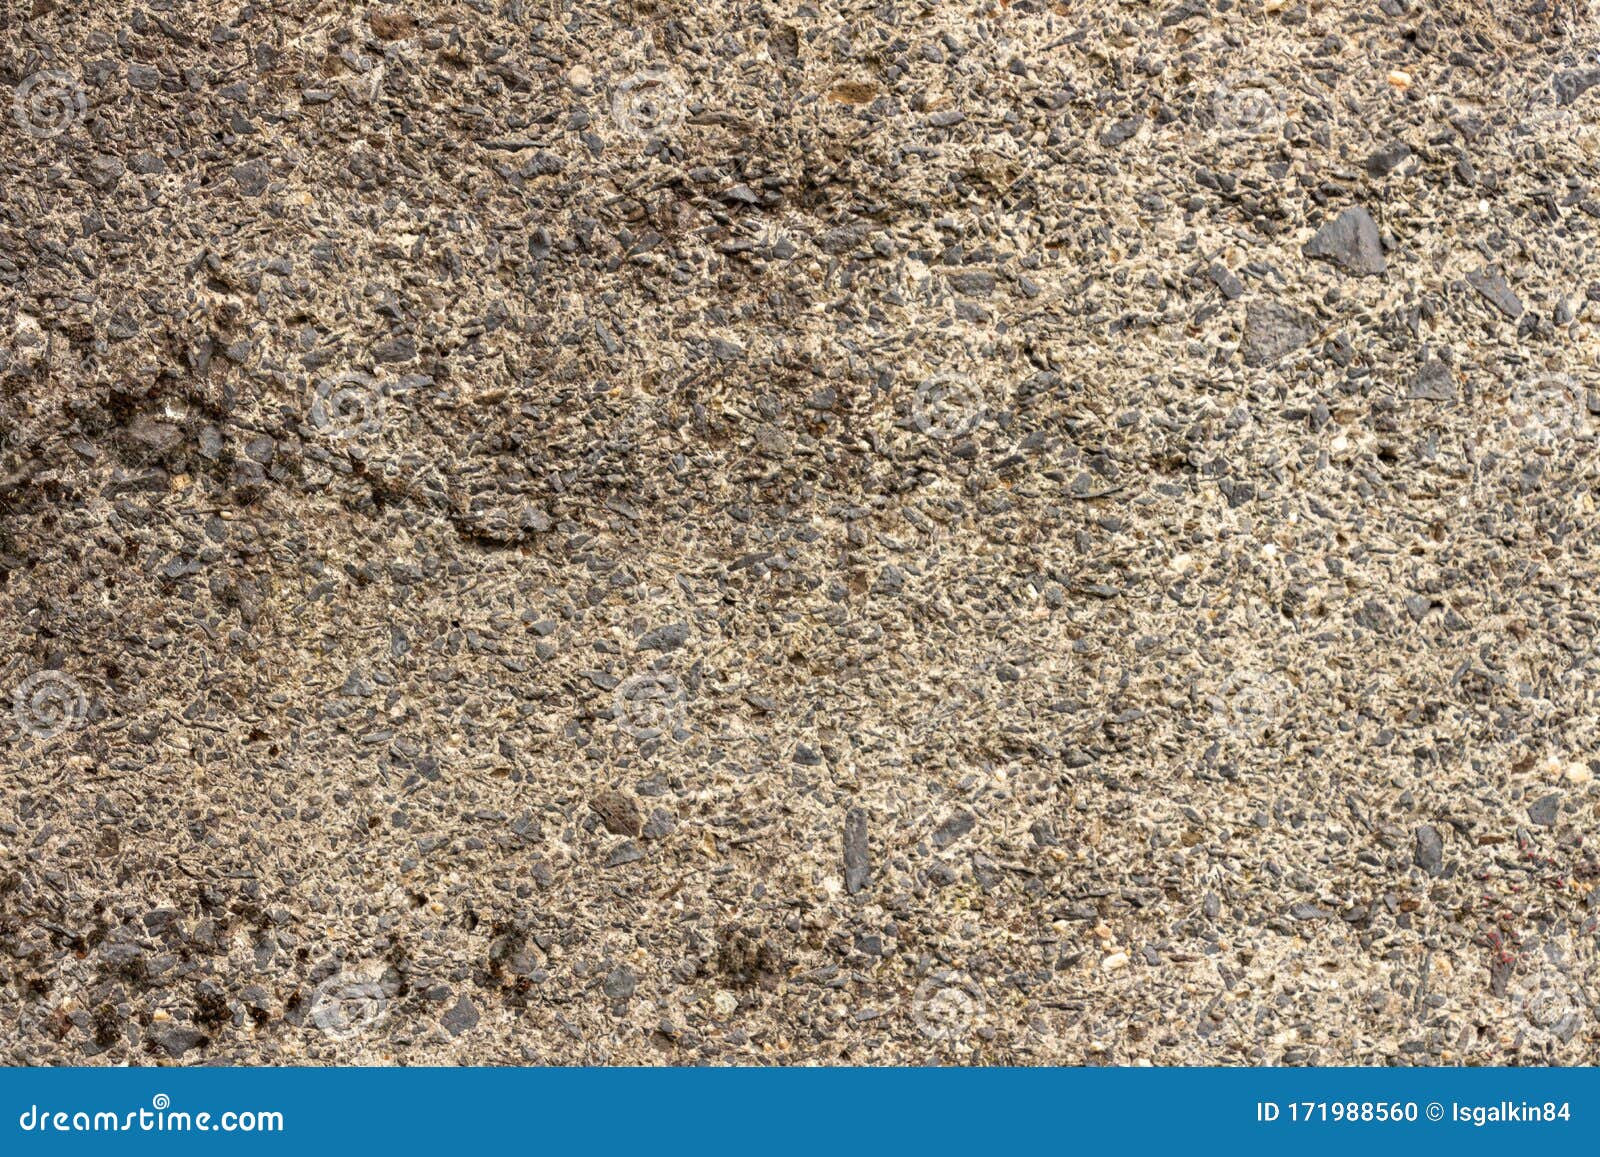 Centenary Concrete Wall, Cement Texture with Rubble Stock Photo - Image ...